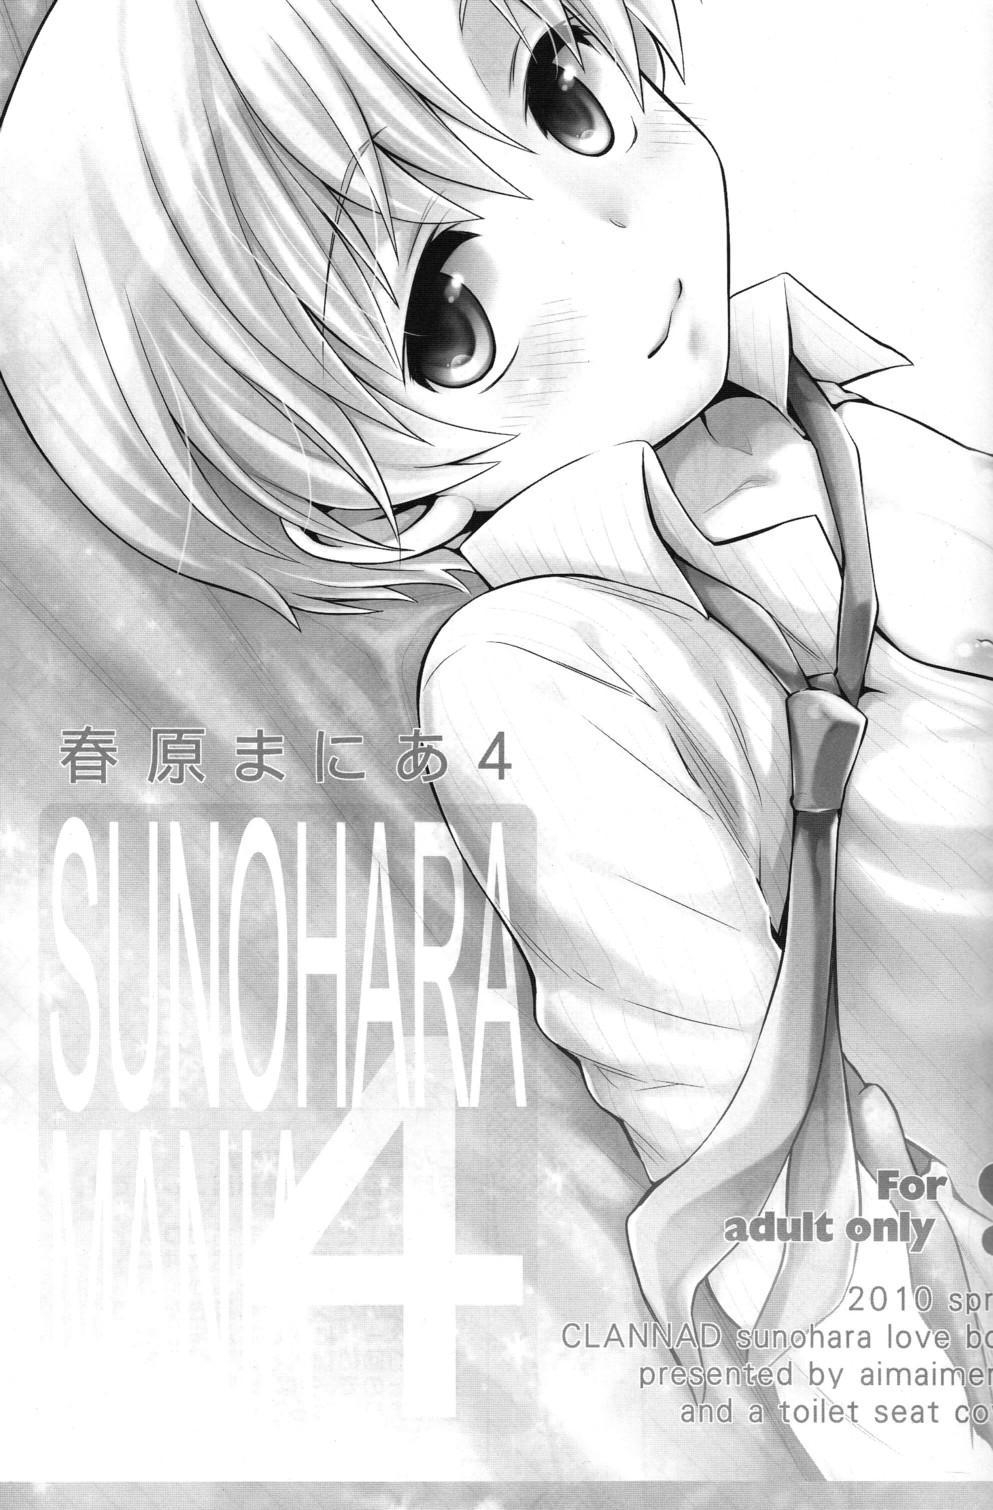 Style Sunohara Mania 4 - Clannad Yanks Featured - Page 3